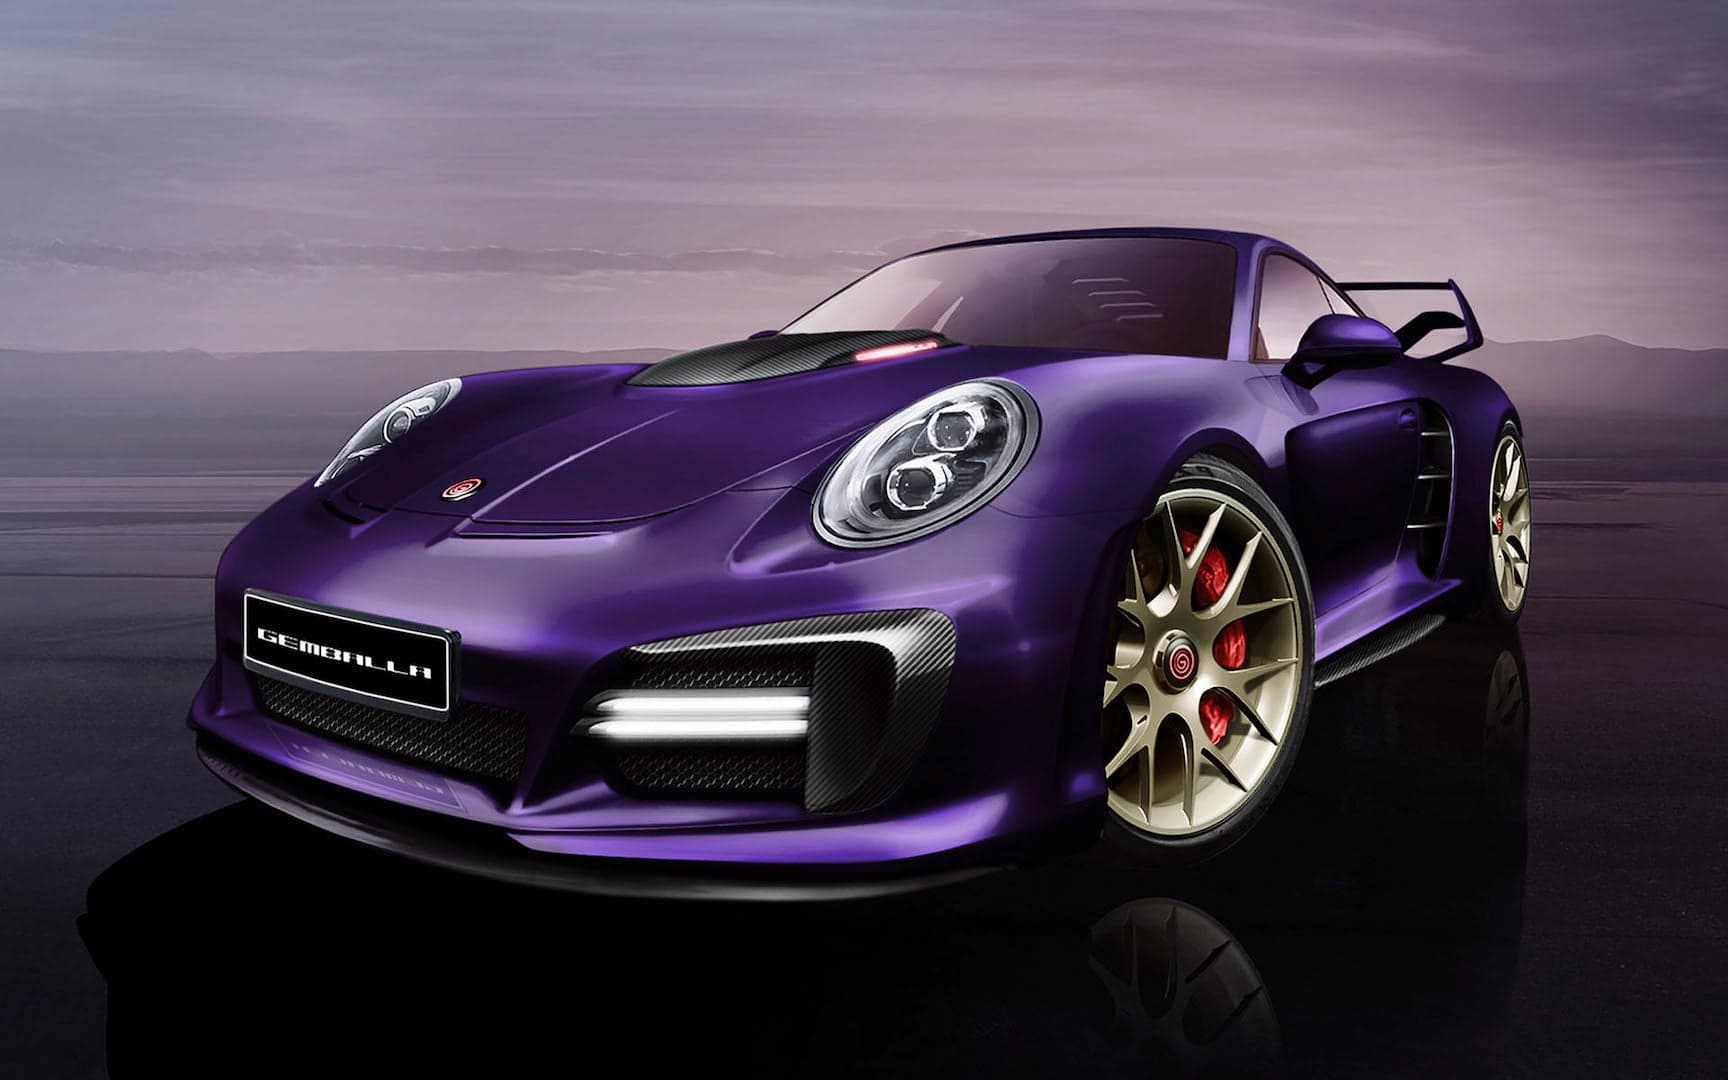 Gemballa Avalanche is a Horribly Desecrated Porsche 911 Turbo